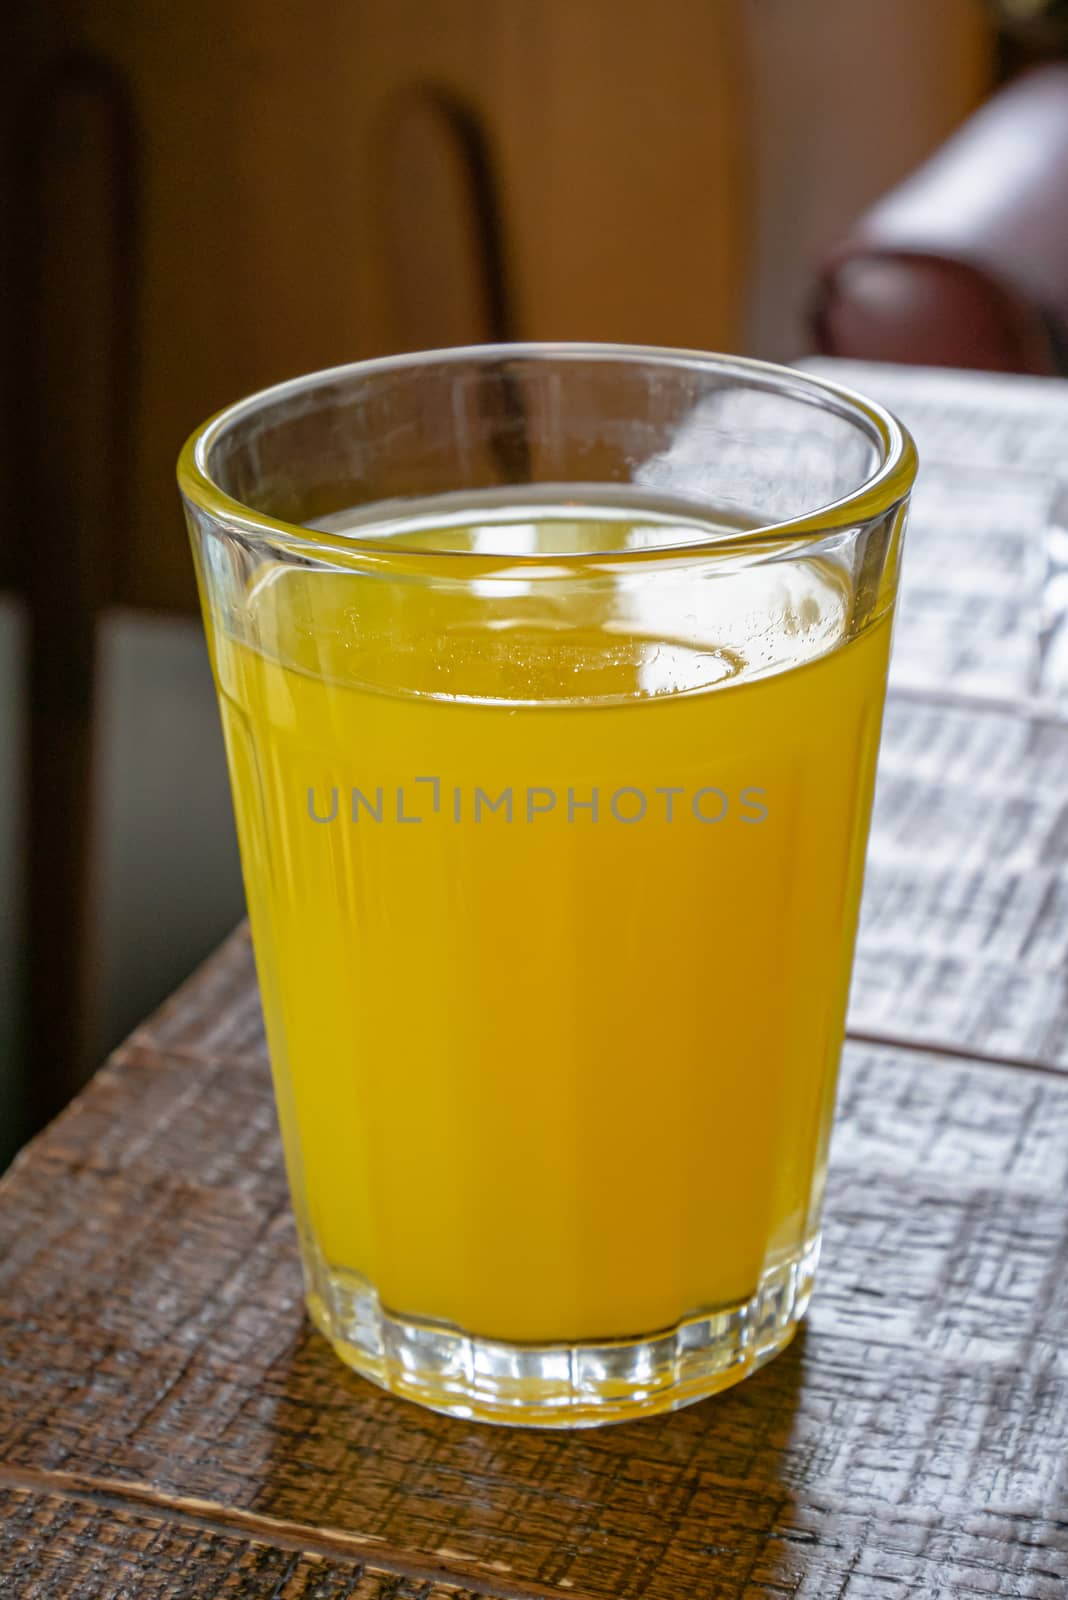 A glass of fresh orange juice drink on brown table in living room.